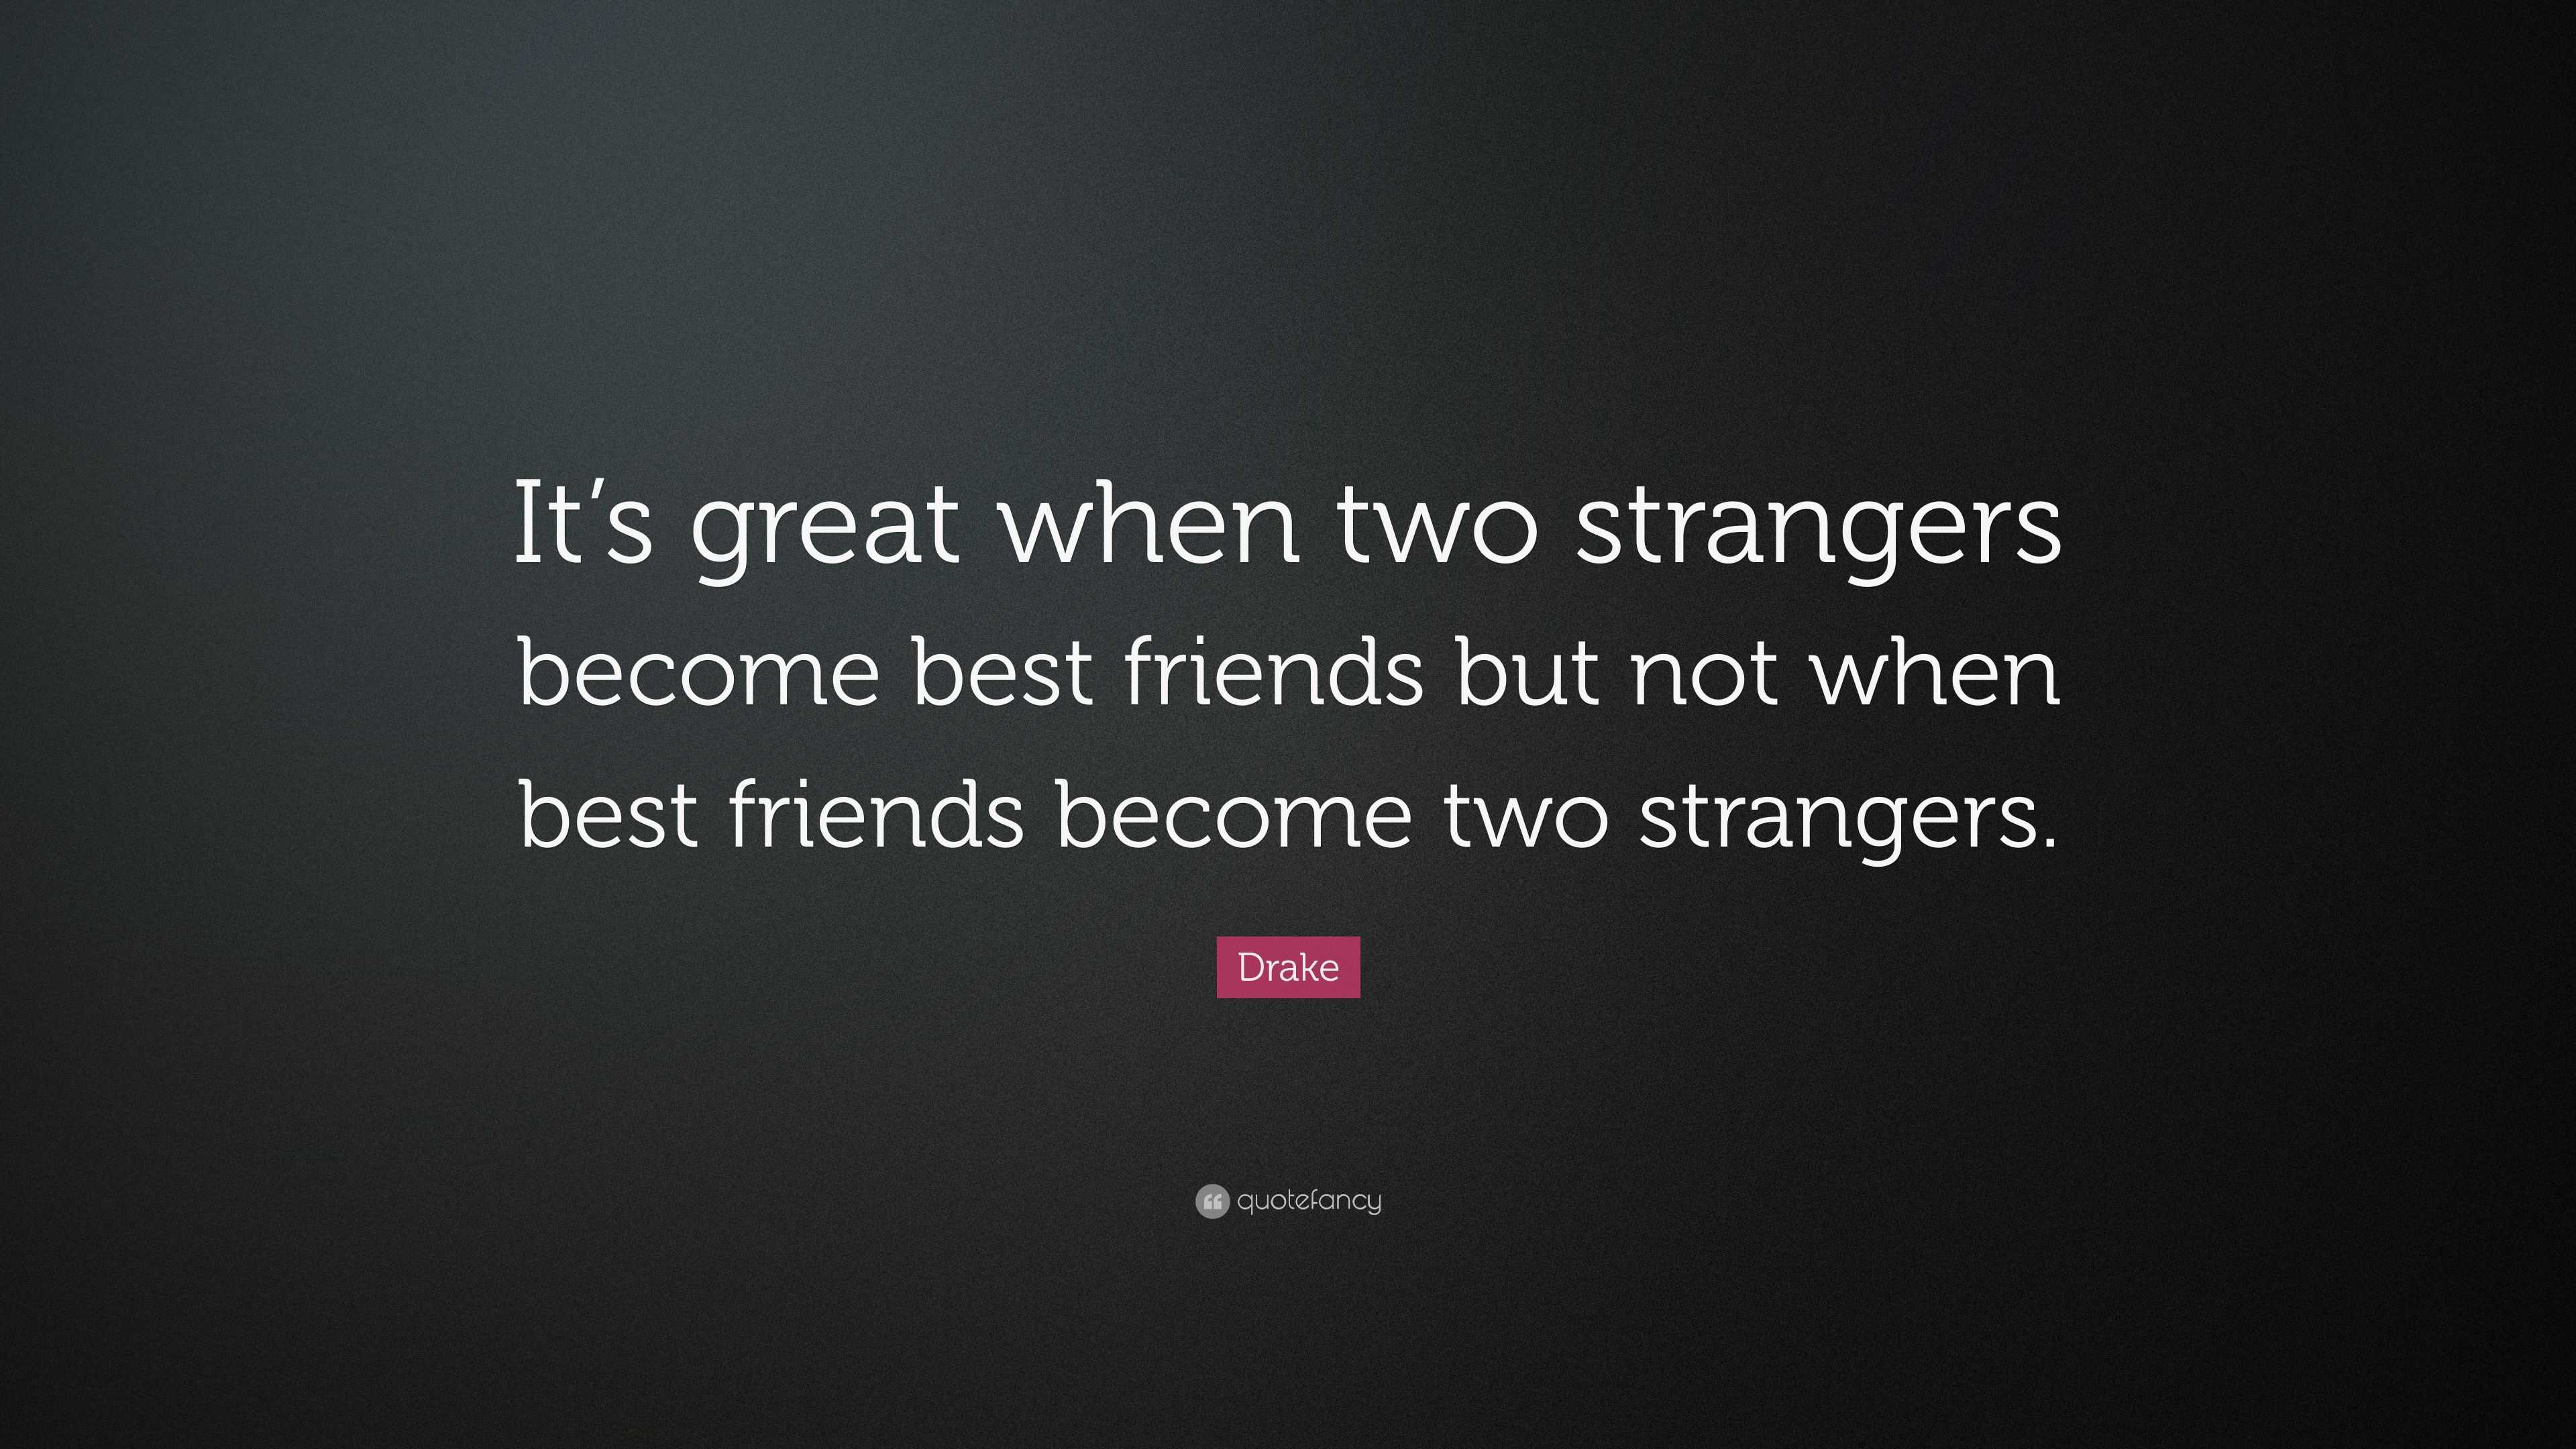 Drake Quote “It’s great when two strangers best friends but not